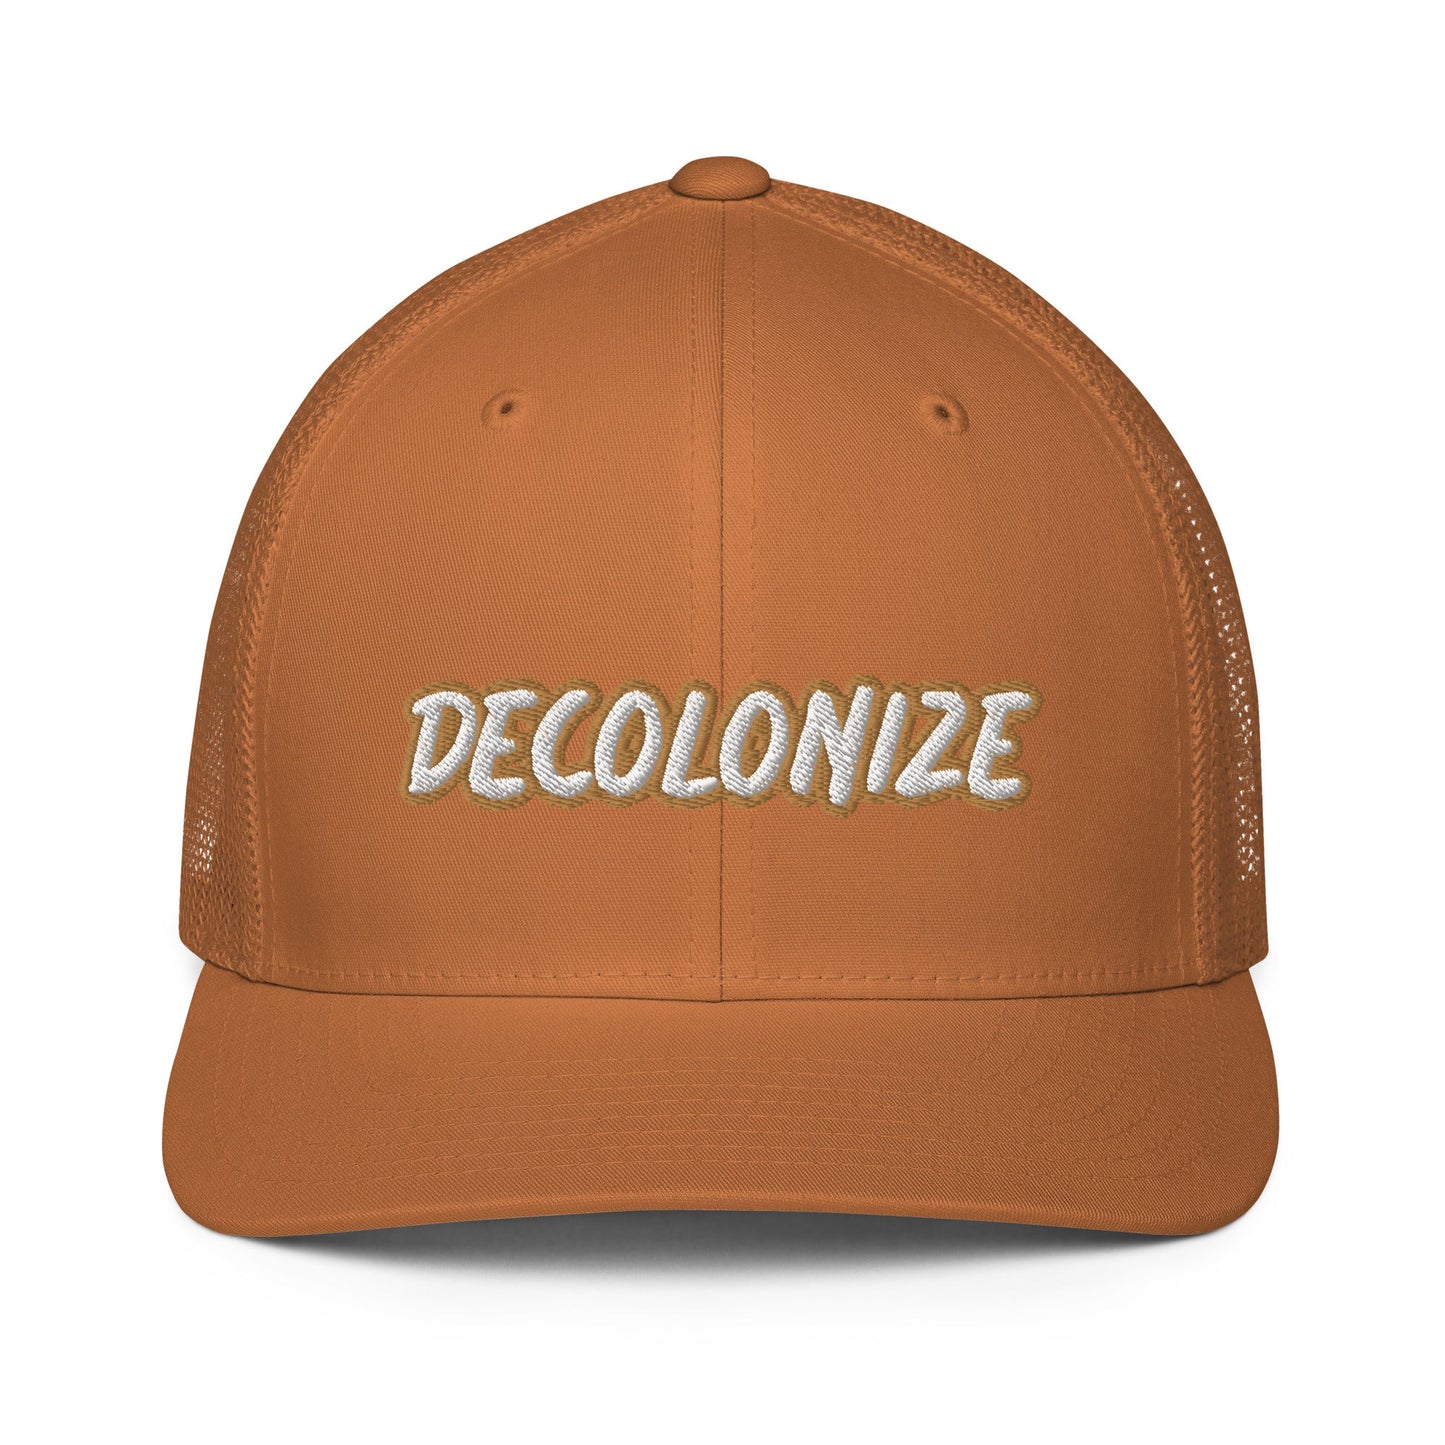 Decolonize Embroidered Closed-back Trucker Hat - Nikikw Designs